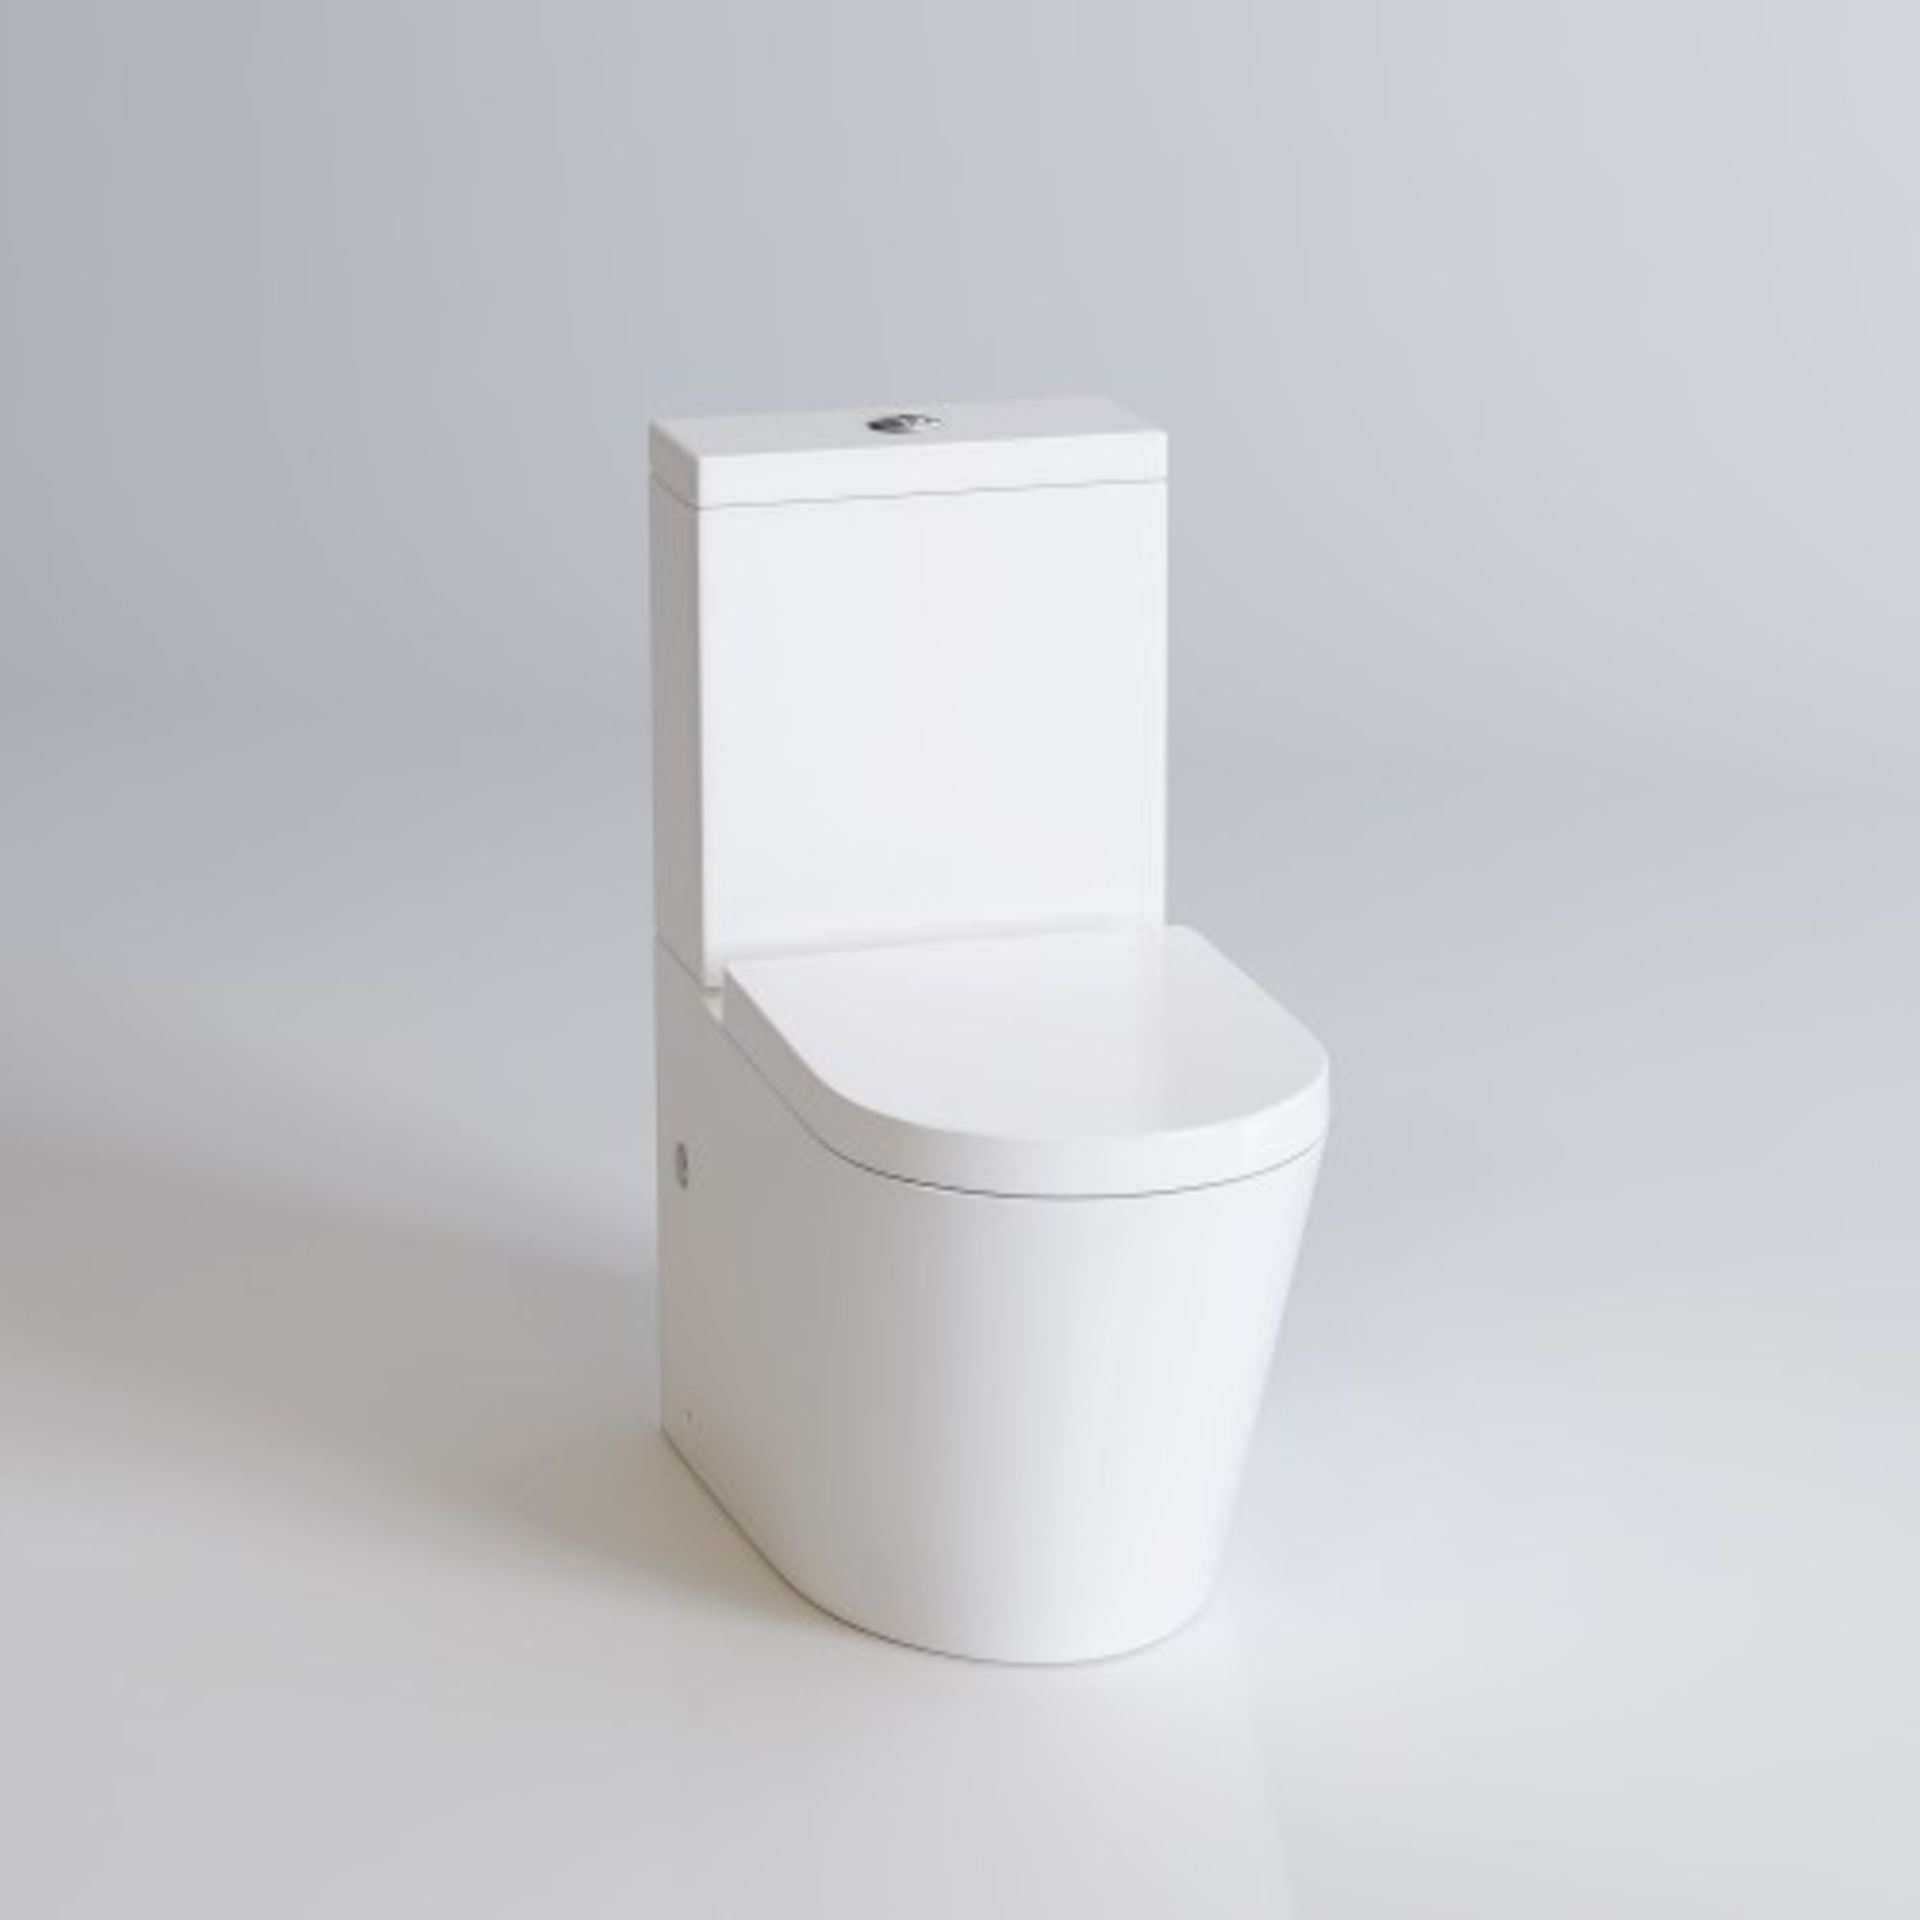 NEW Lyon II Close Coupled Toilet & Cistern inc Luxury Soft Close Seat. RRP £599.99.Lyon is a ... - Image 2 of 3